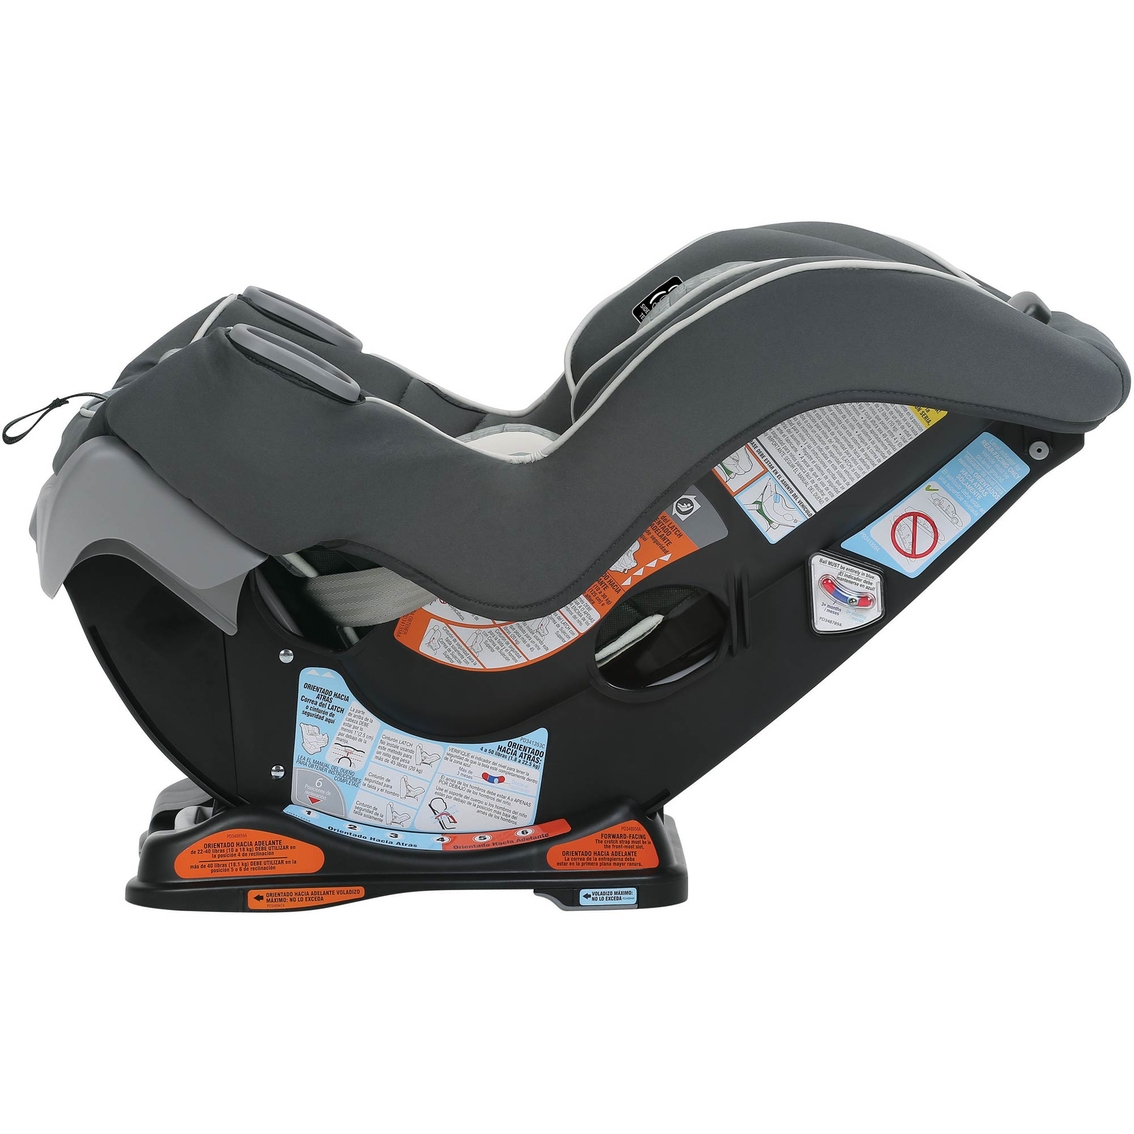 Graco Extend2Fit Convertible Car Seat - Image 2 of 4